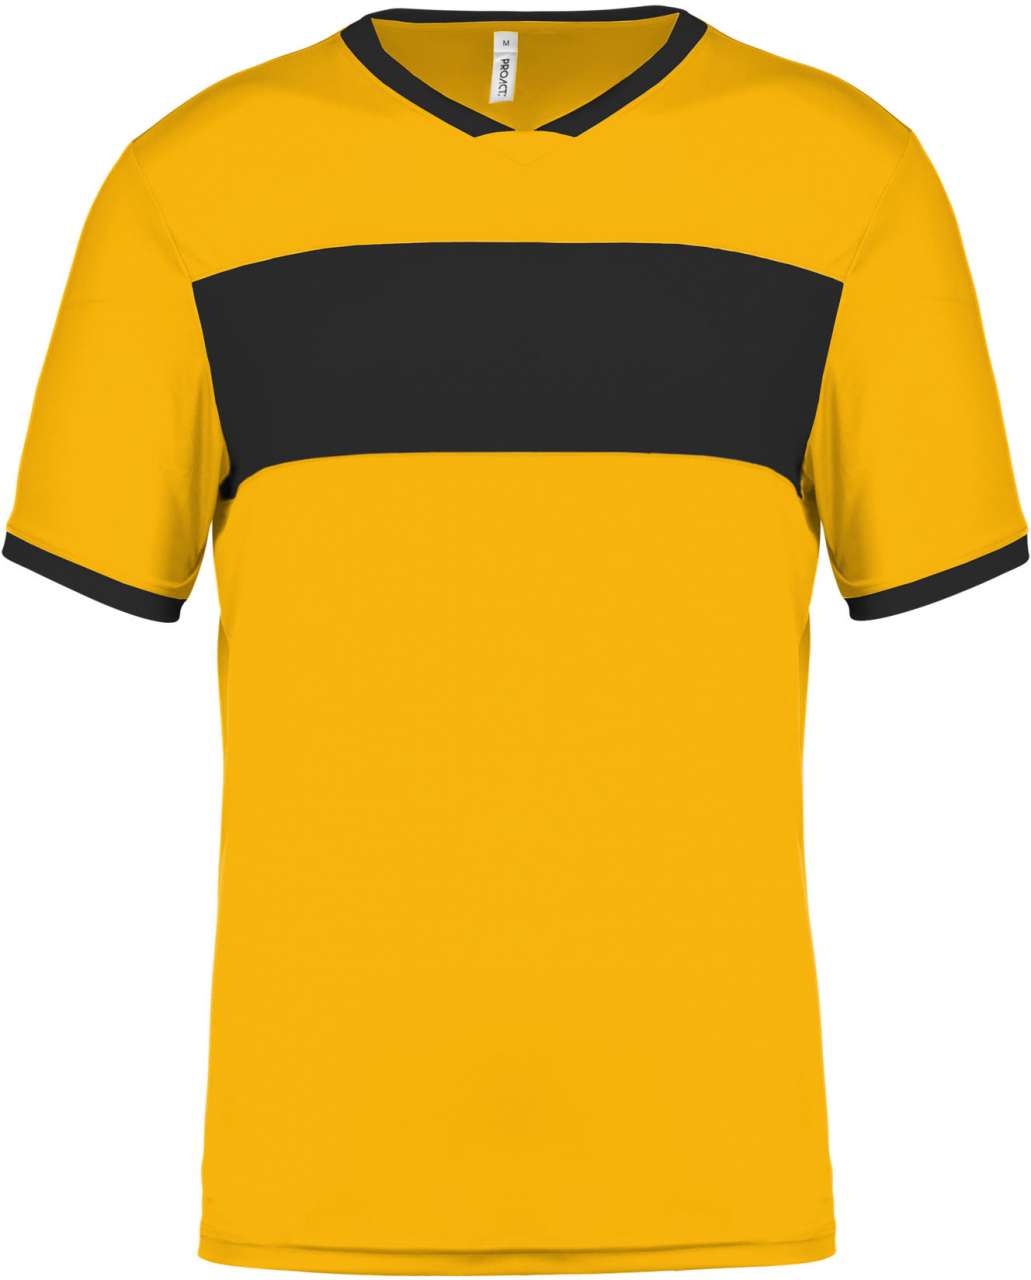 Promo  ADULTS' SHORT-SLEEVED JERSEY